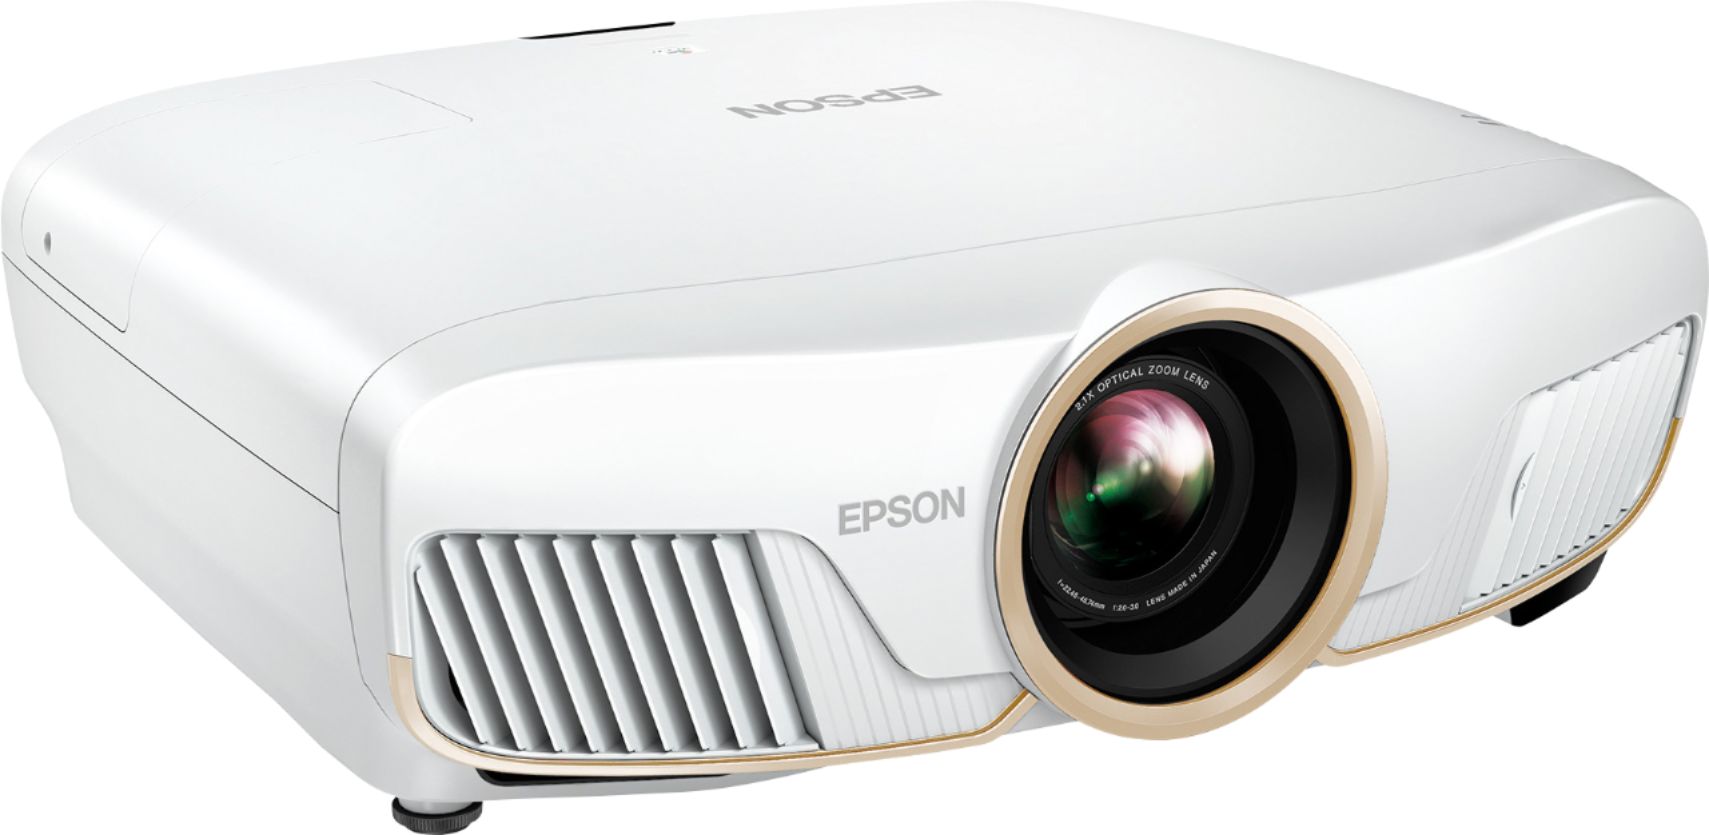 Angle View: Epson - Home Cinema 5050UB 4K PRO-UHD 3-Chip HDR Projector, 2600 lumens, UltraBlack, HDMI, Motorized Lens, Movies, Gaming - White